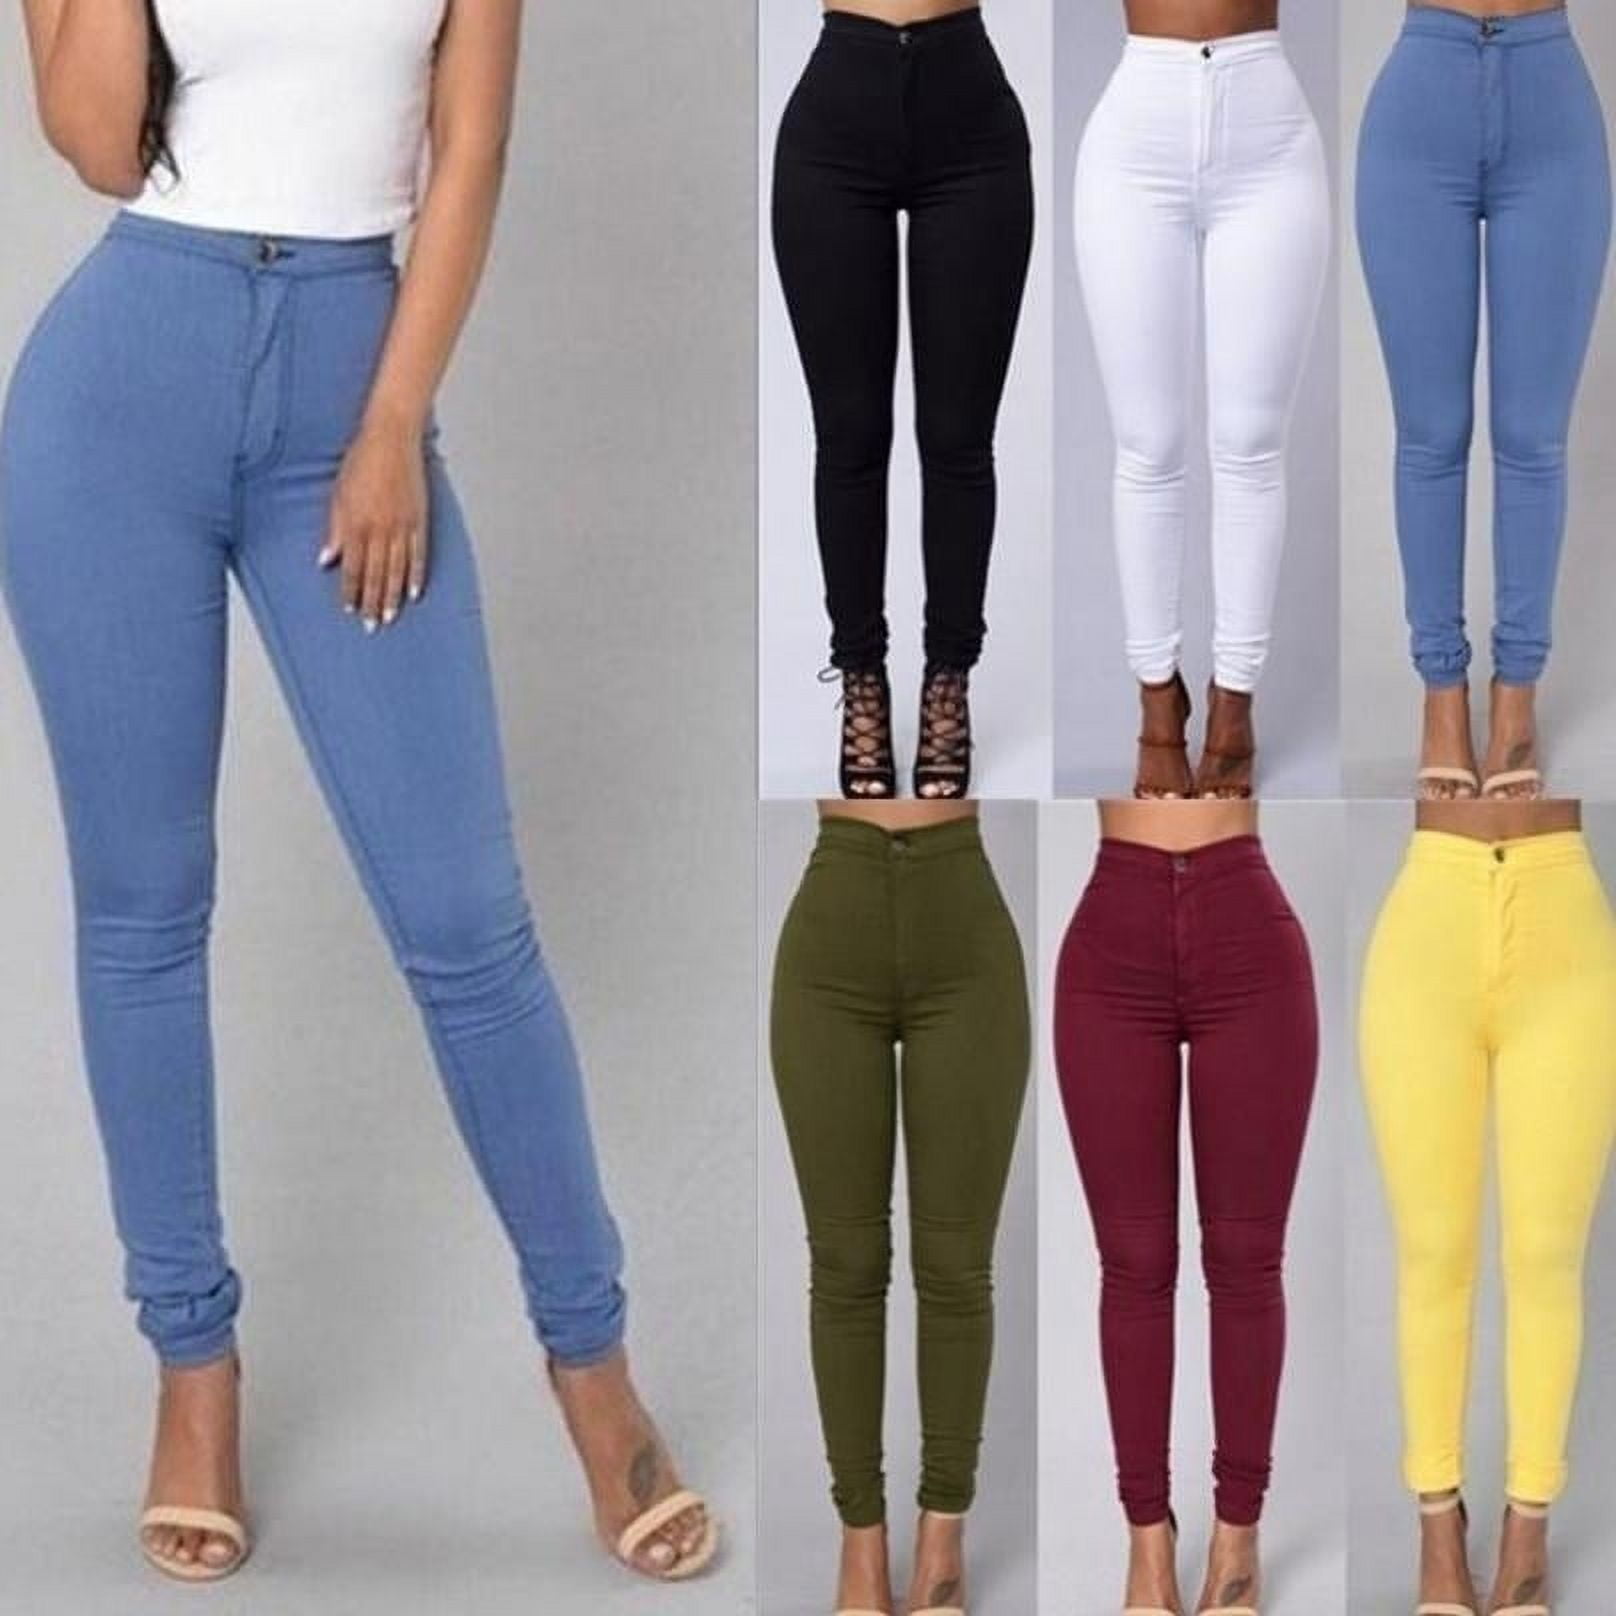 NEW LADIES WOMEN HIGH WAISTED SEXY SKINNY JEANS PANTS SIZE 6 8 10 12 14 ...